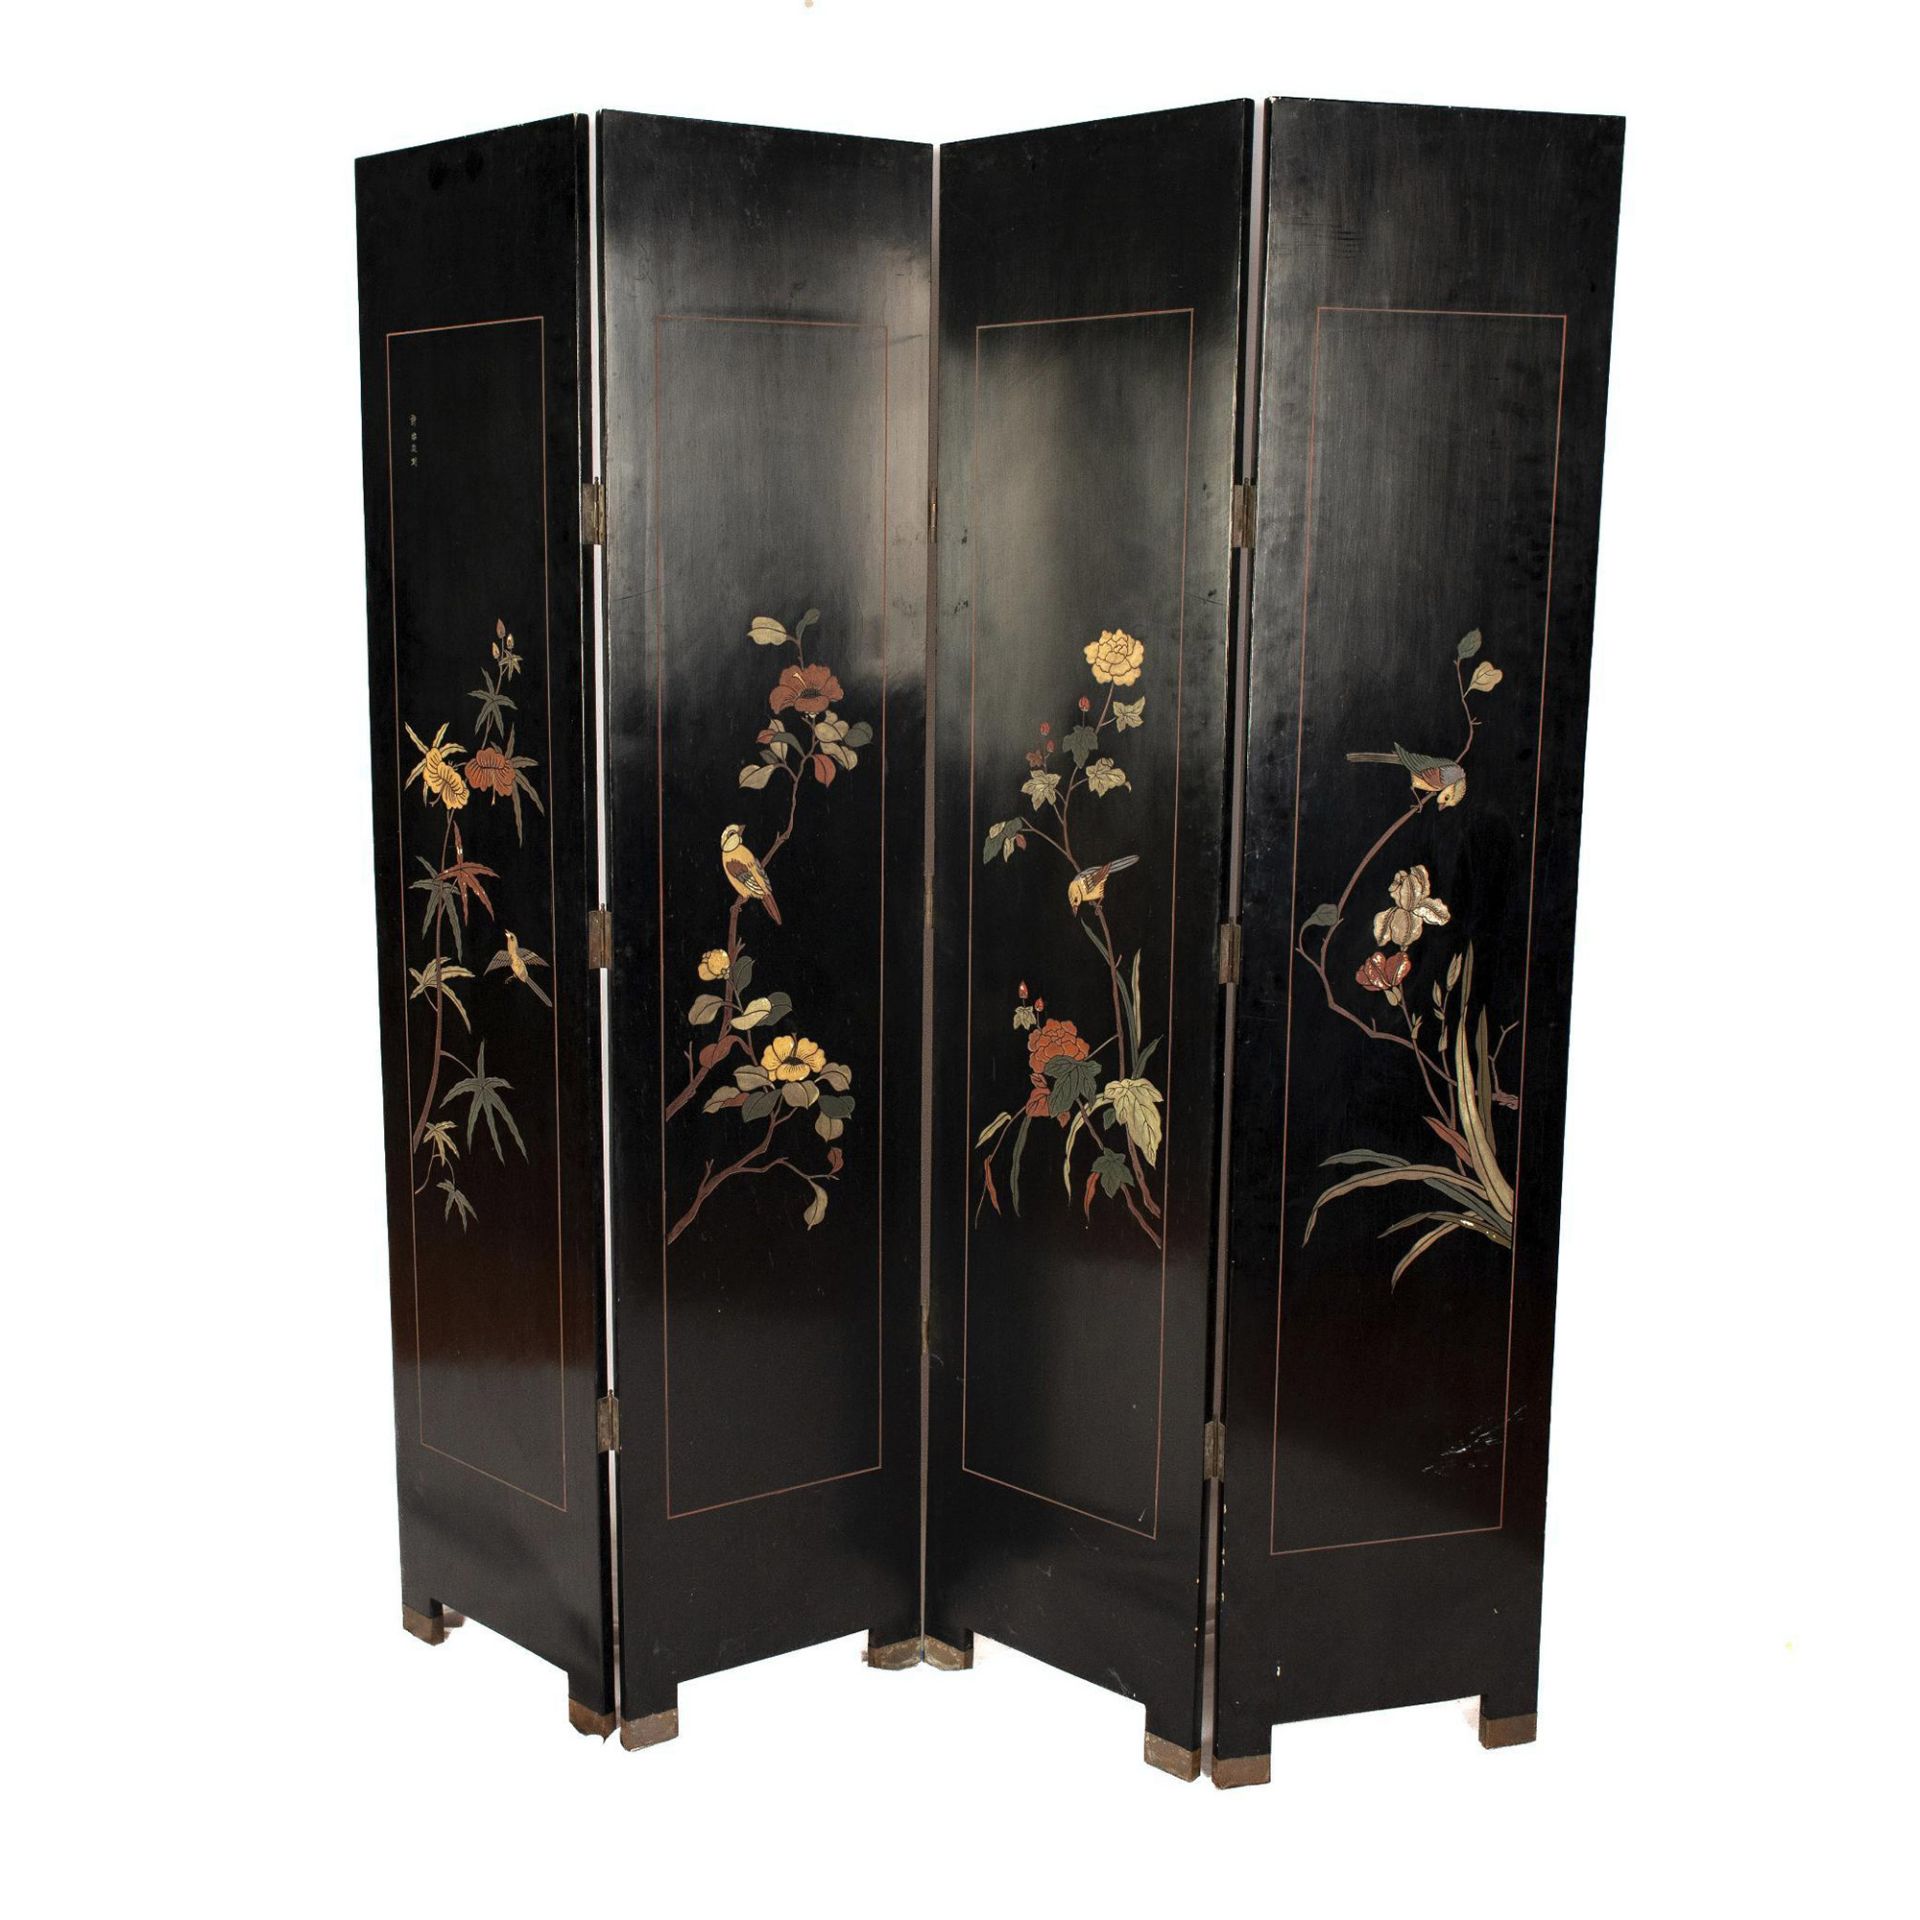 Original Gilded and Hand Painted Four Panel Asian Screen - Image 7 of 11